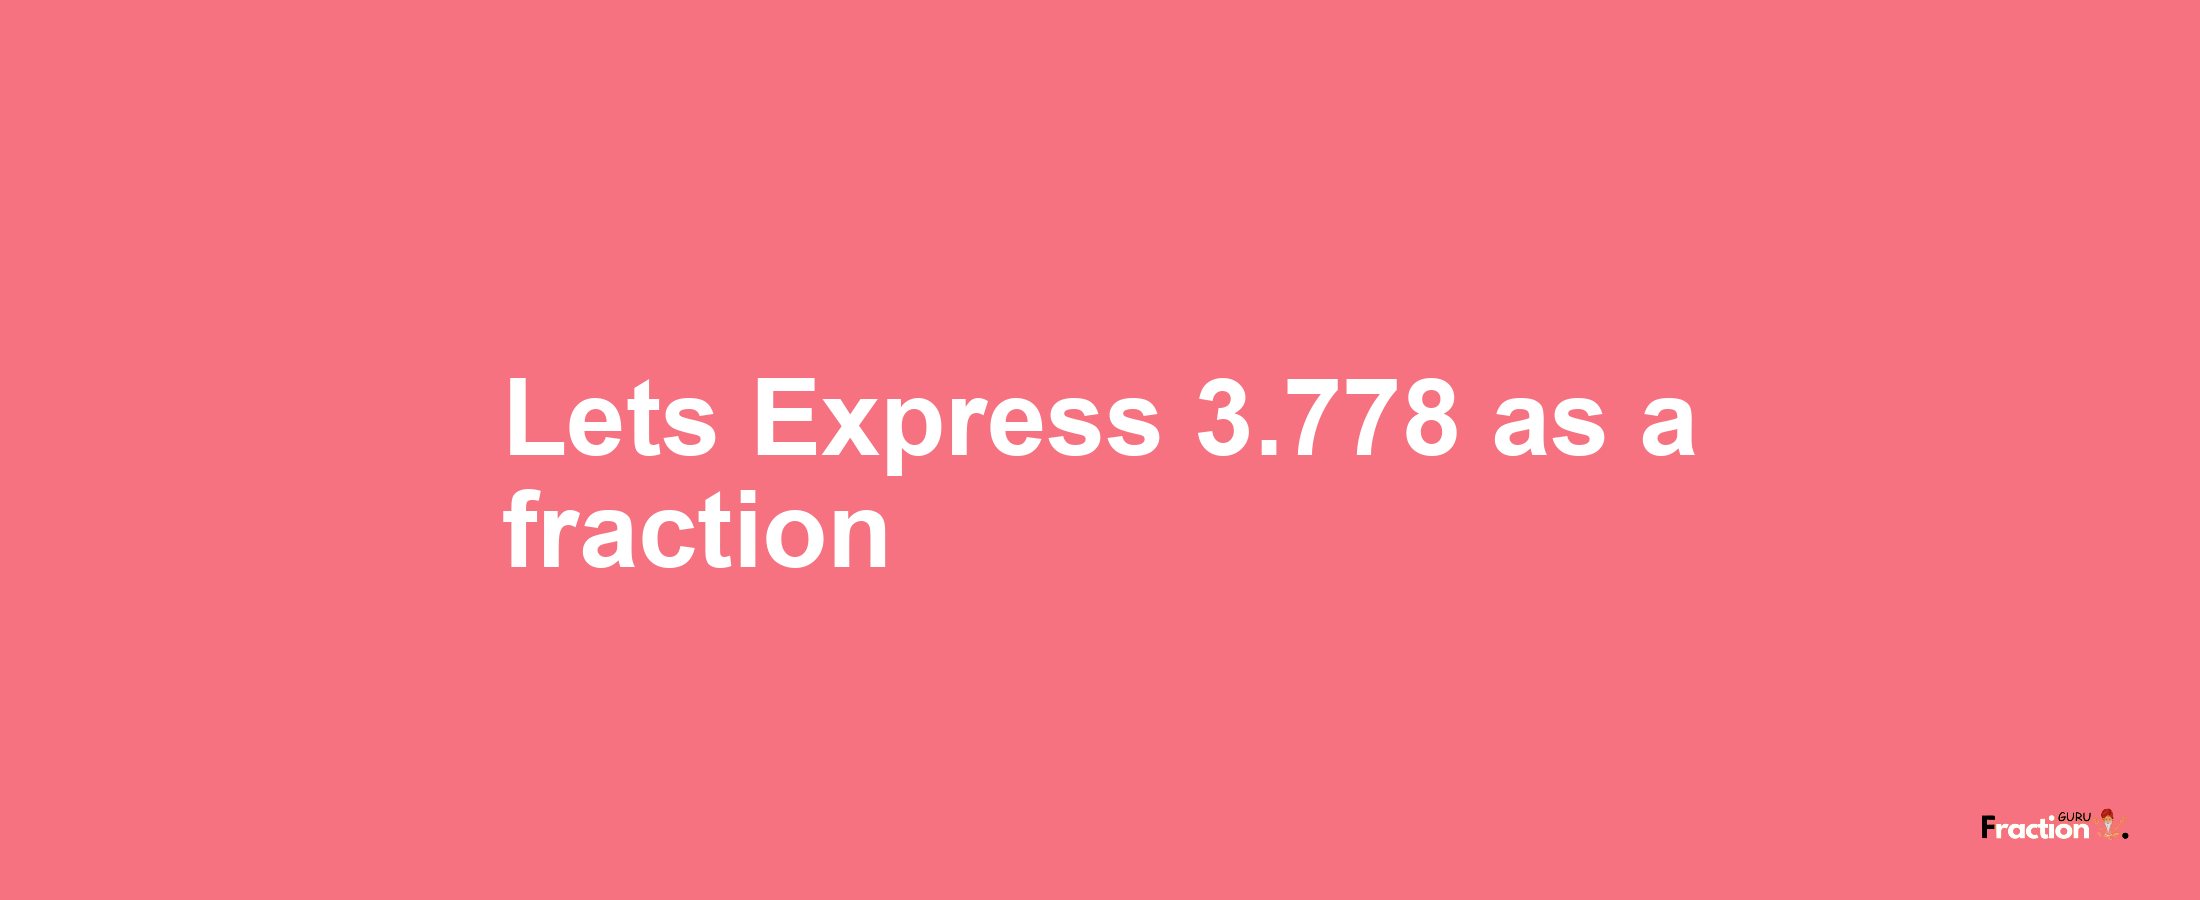 Lets Express 3.778 as afraction